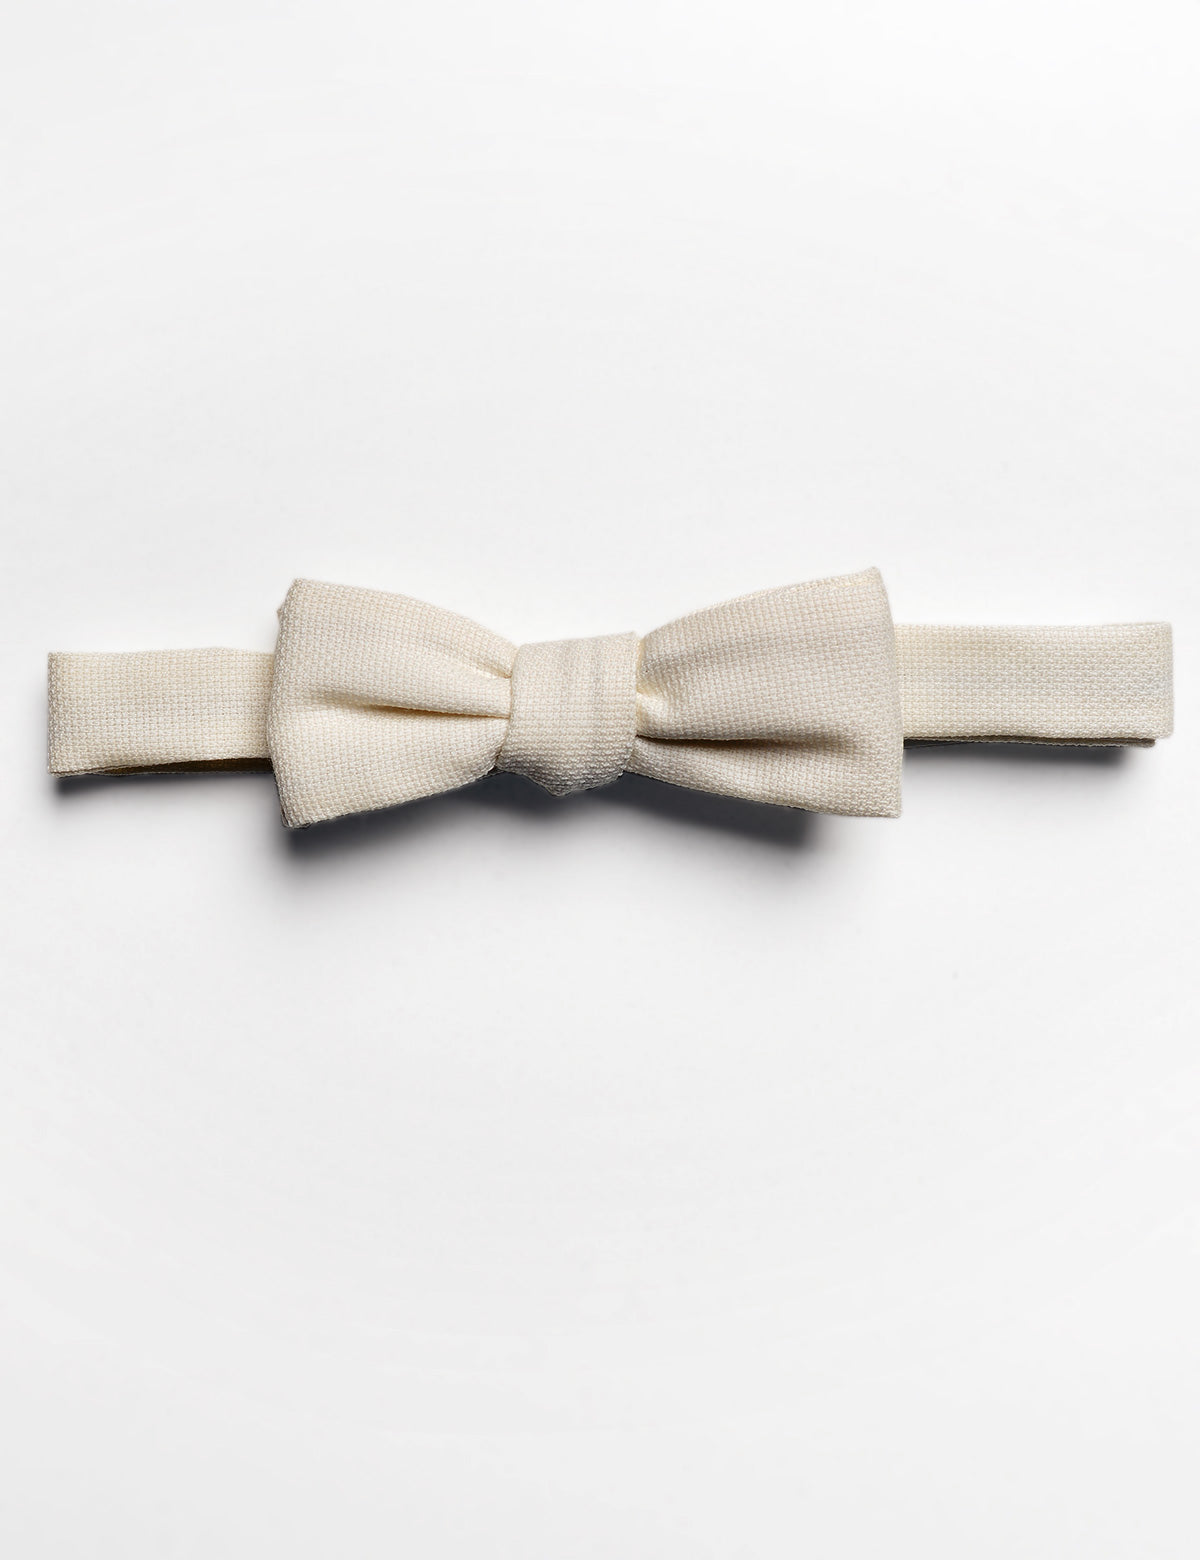 Flat shot of Brooklyn Tailors Formal Bowtie in Ivory Hopsack